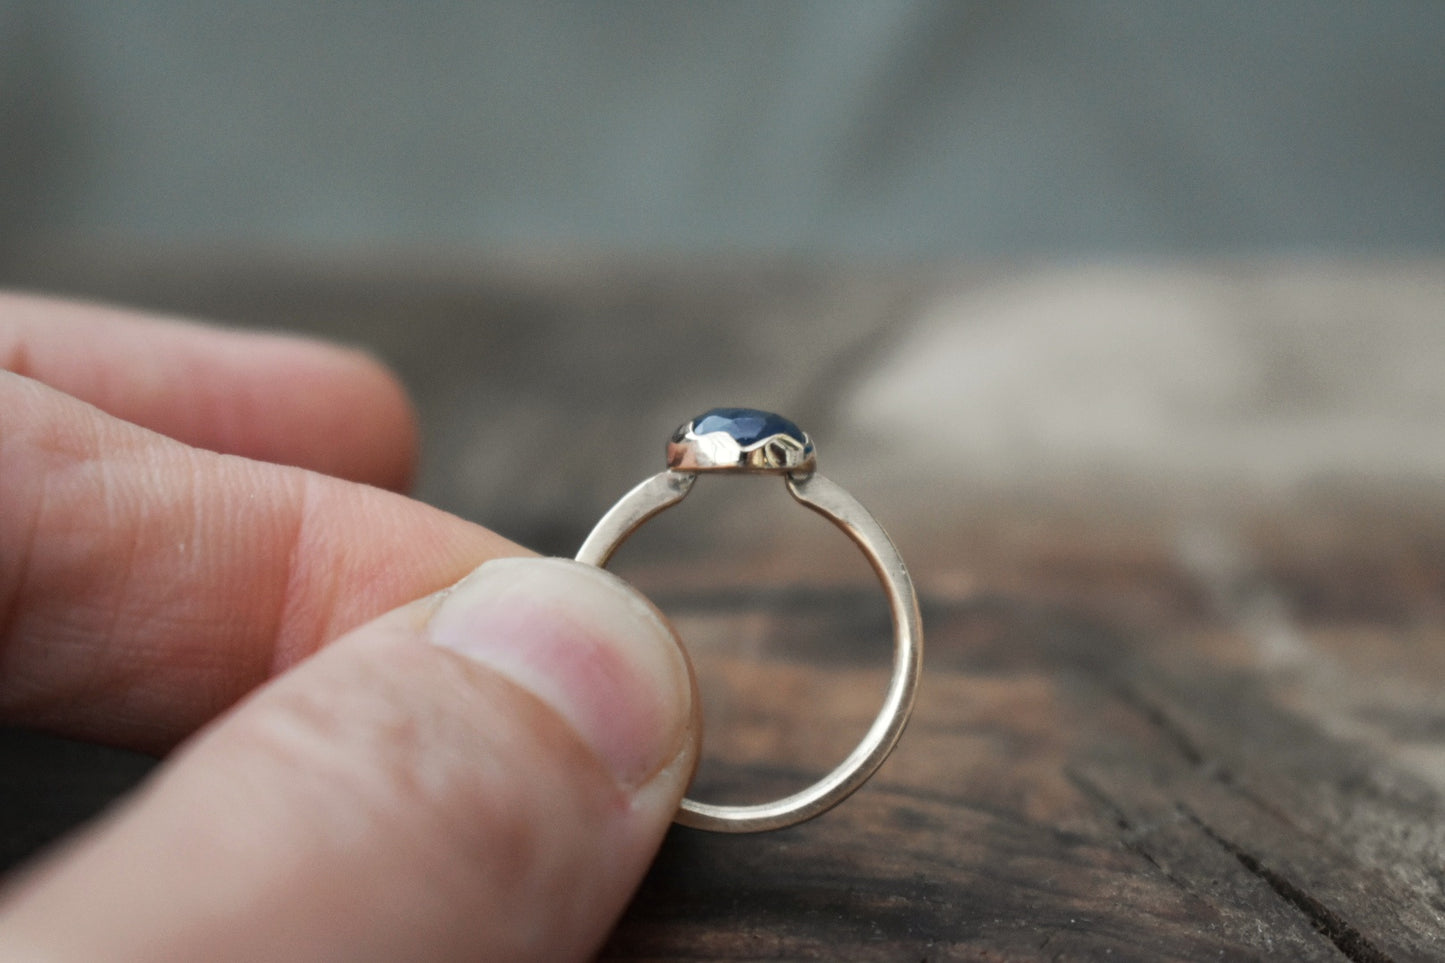 Blue Sapphire & 9ct Gold Leaf Setting Ring